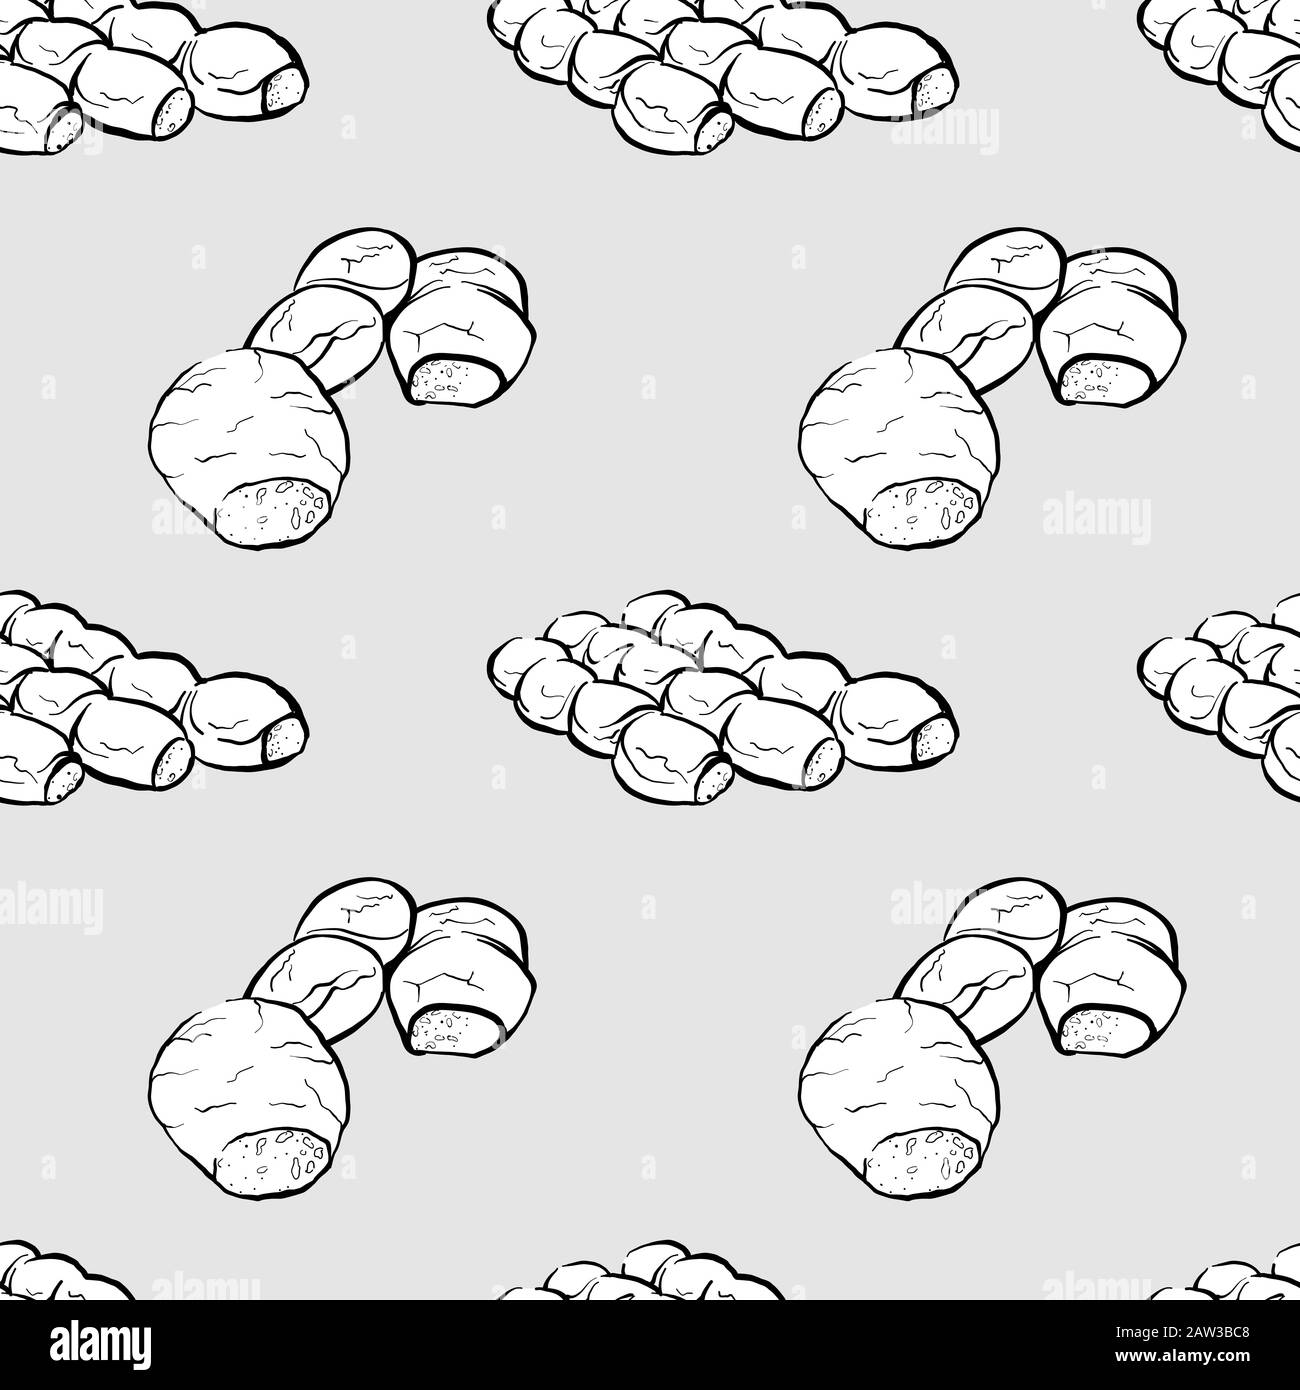 Maltese bread seamless pattern greyscale drawing. Useable for wallpaper or any sized decoration. Handdrawn Vector Illustration Stock Vector